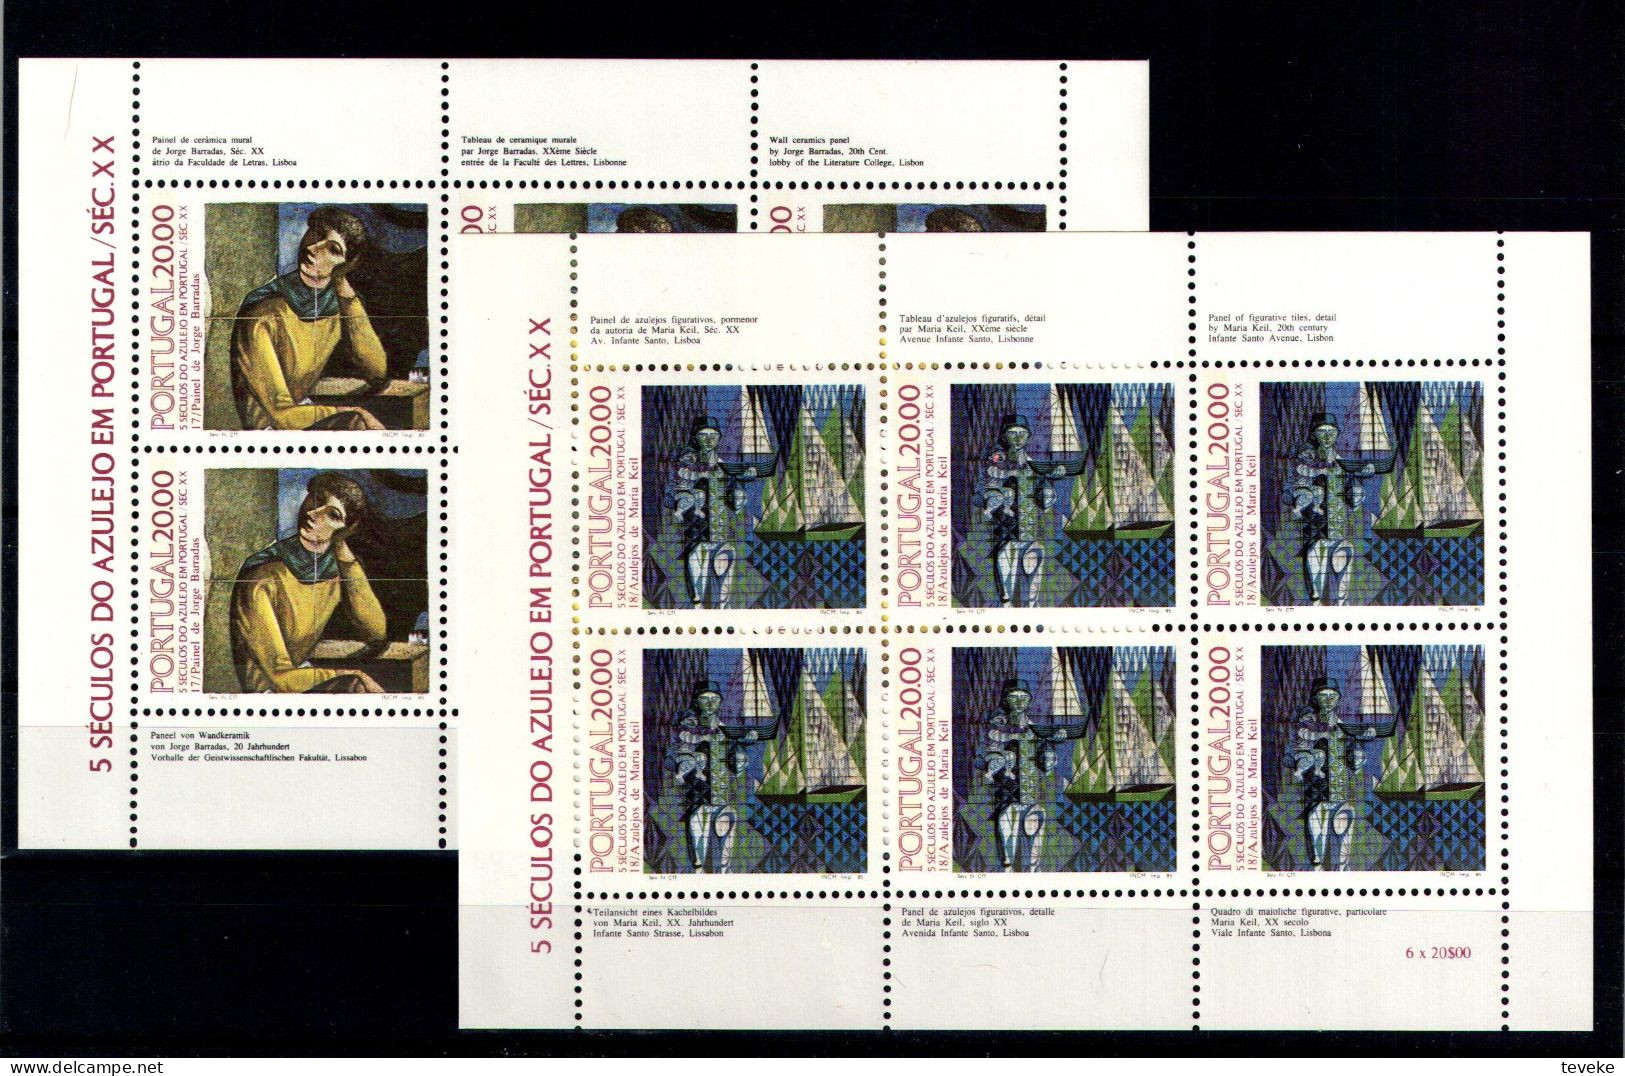 PORTUGAL 1981/1985 - MNH ** - Azulejos - Complete Set of Blocks and Minisheets